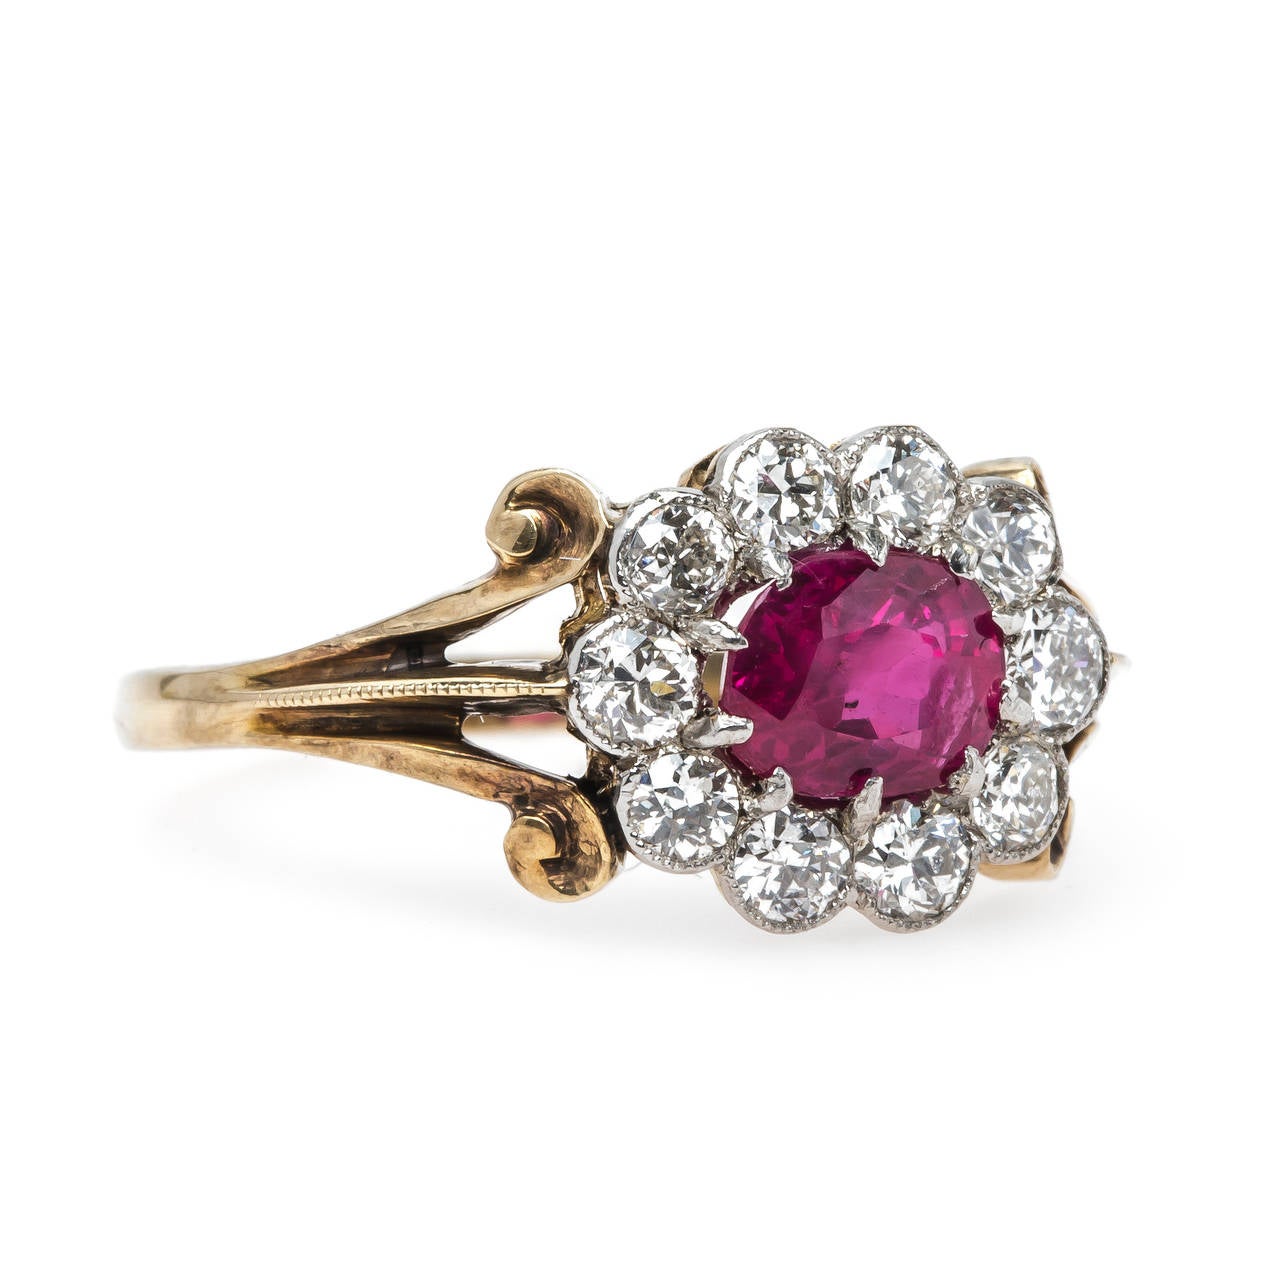 Orchard Park is a spectacular Edwardian era (circa 1910) platinum-topped 14k yellow gold ring complete with a T&H custom 14k yellow gold shank. The ring centers a ten-prong set oval natural ruby accompanied with a Guild Laboratories certificate